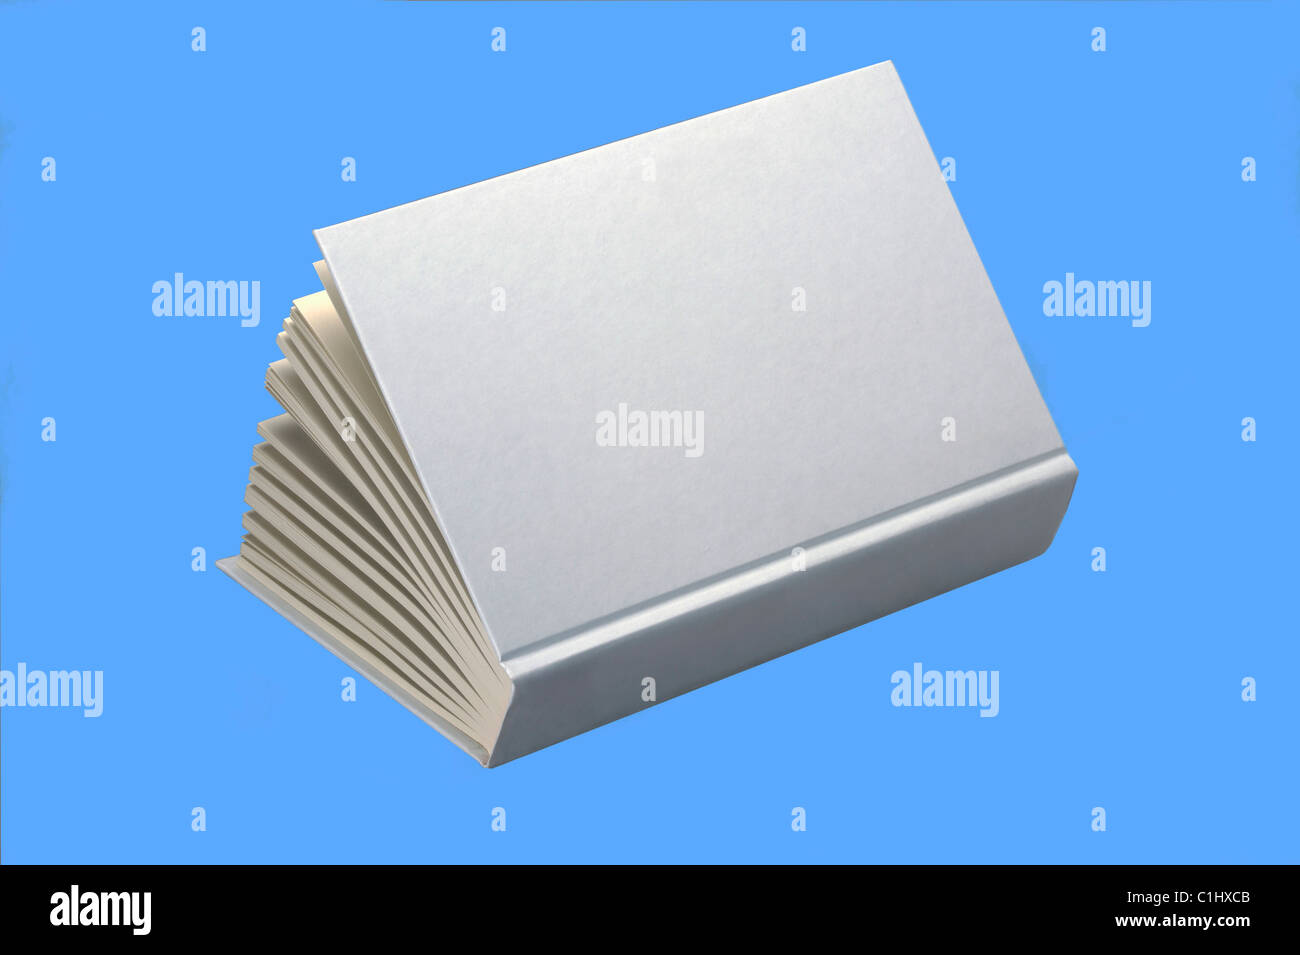 Open white book isolated on blue background, for design layout Stock Photo